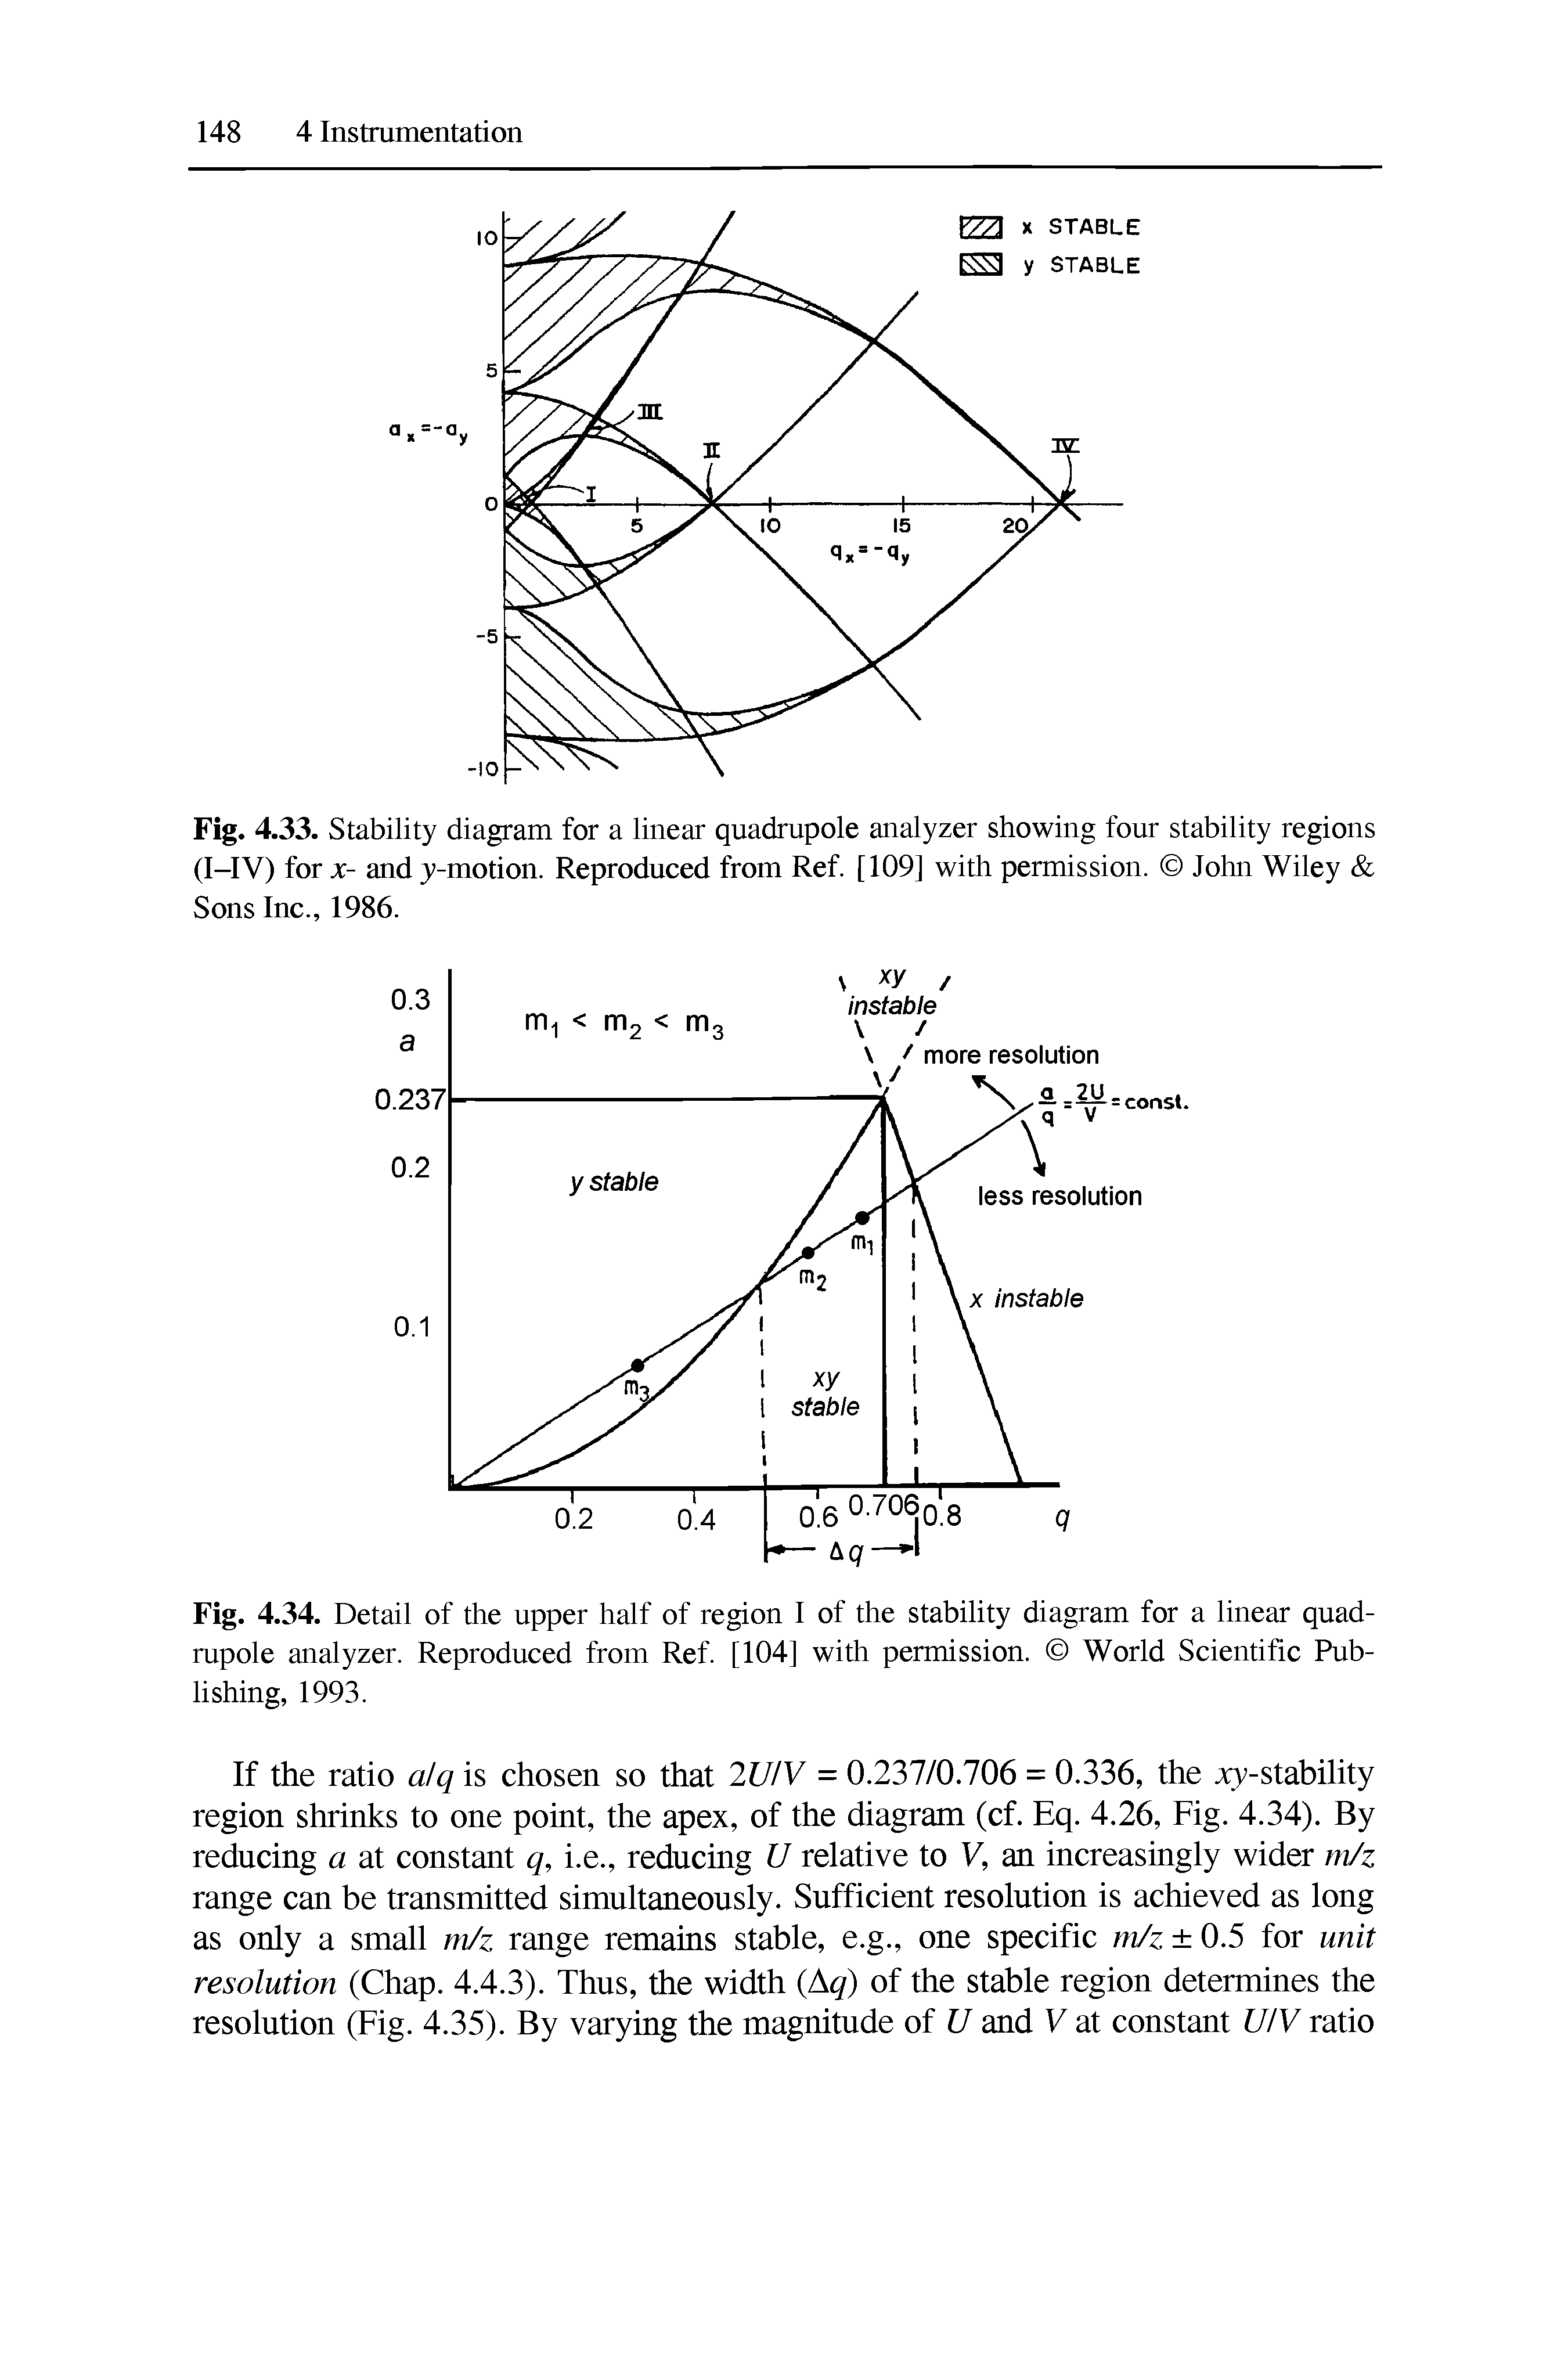 Fig. 4.34. Detail of the upper half of region I of the stability diagram for a linear quadrupole analyzer. Reproduced from Ref. [104] with permission. World Scientific Publishing, 1993.